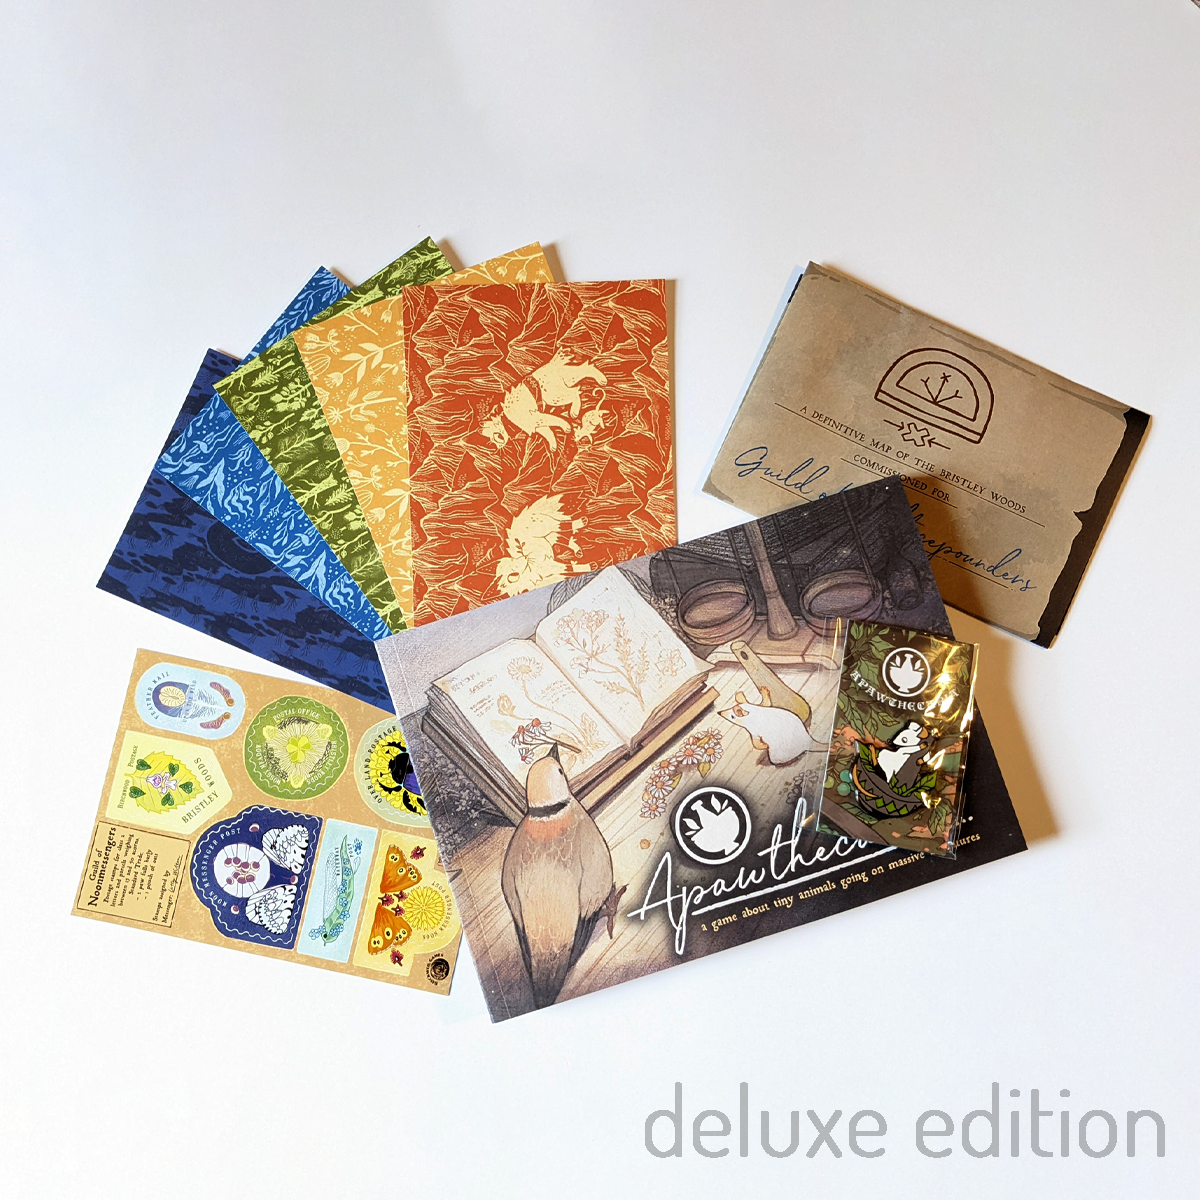 Photo. The deluxe set for Apawthecaria, showing 5 illustrated post cards, a sticker sheet of stamp designs, and a pin badge of a potion-making mouse, alongside the book Apawthecaria and its game map.